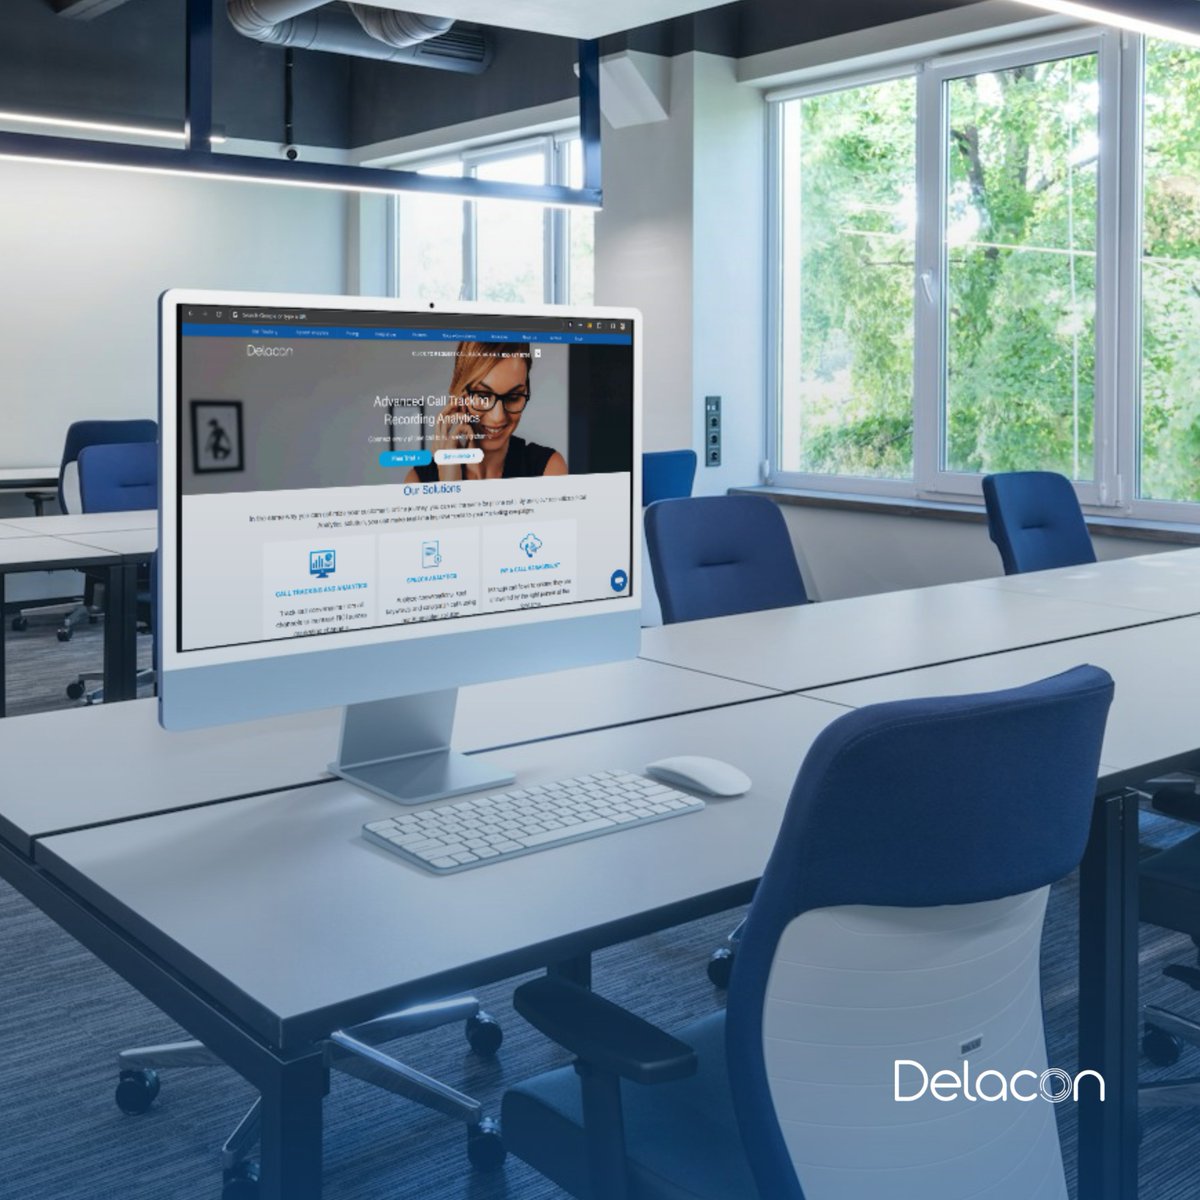 Struggling to find the perfect Call Tracking solution for your business? Delacon provides customizable solutions to fit your needs.

#delacon #calltracking #demo #businesssolutions